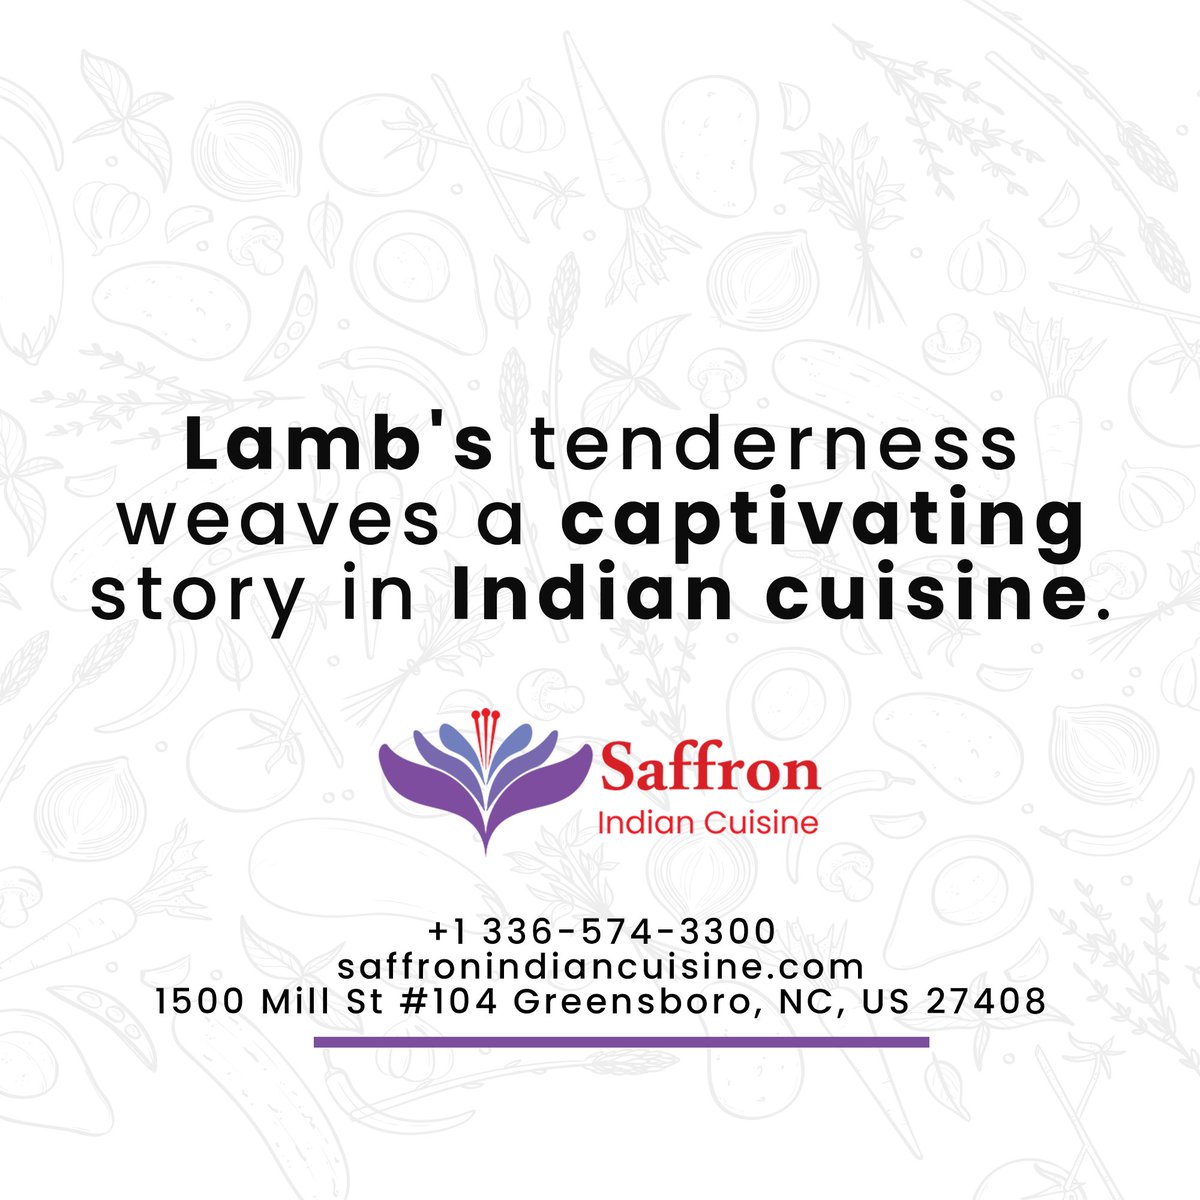 Today's Quote!
.
#SaffronIndianCuisine #FoodQuotes #FoodieLife #FlavorfulDelights #FoodInspiration #IndianCuisine #FoodGasm #DeliciousEats #FoodLovers #TasteBudTreat #FoodPassion #QuoteOfTheDay #FoodiesOfInstagram #FoodPhotography #FoodieLove #FoodieVibes